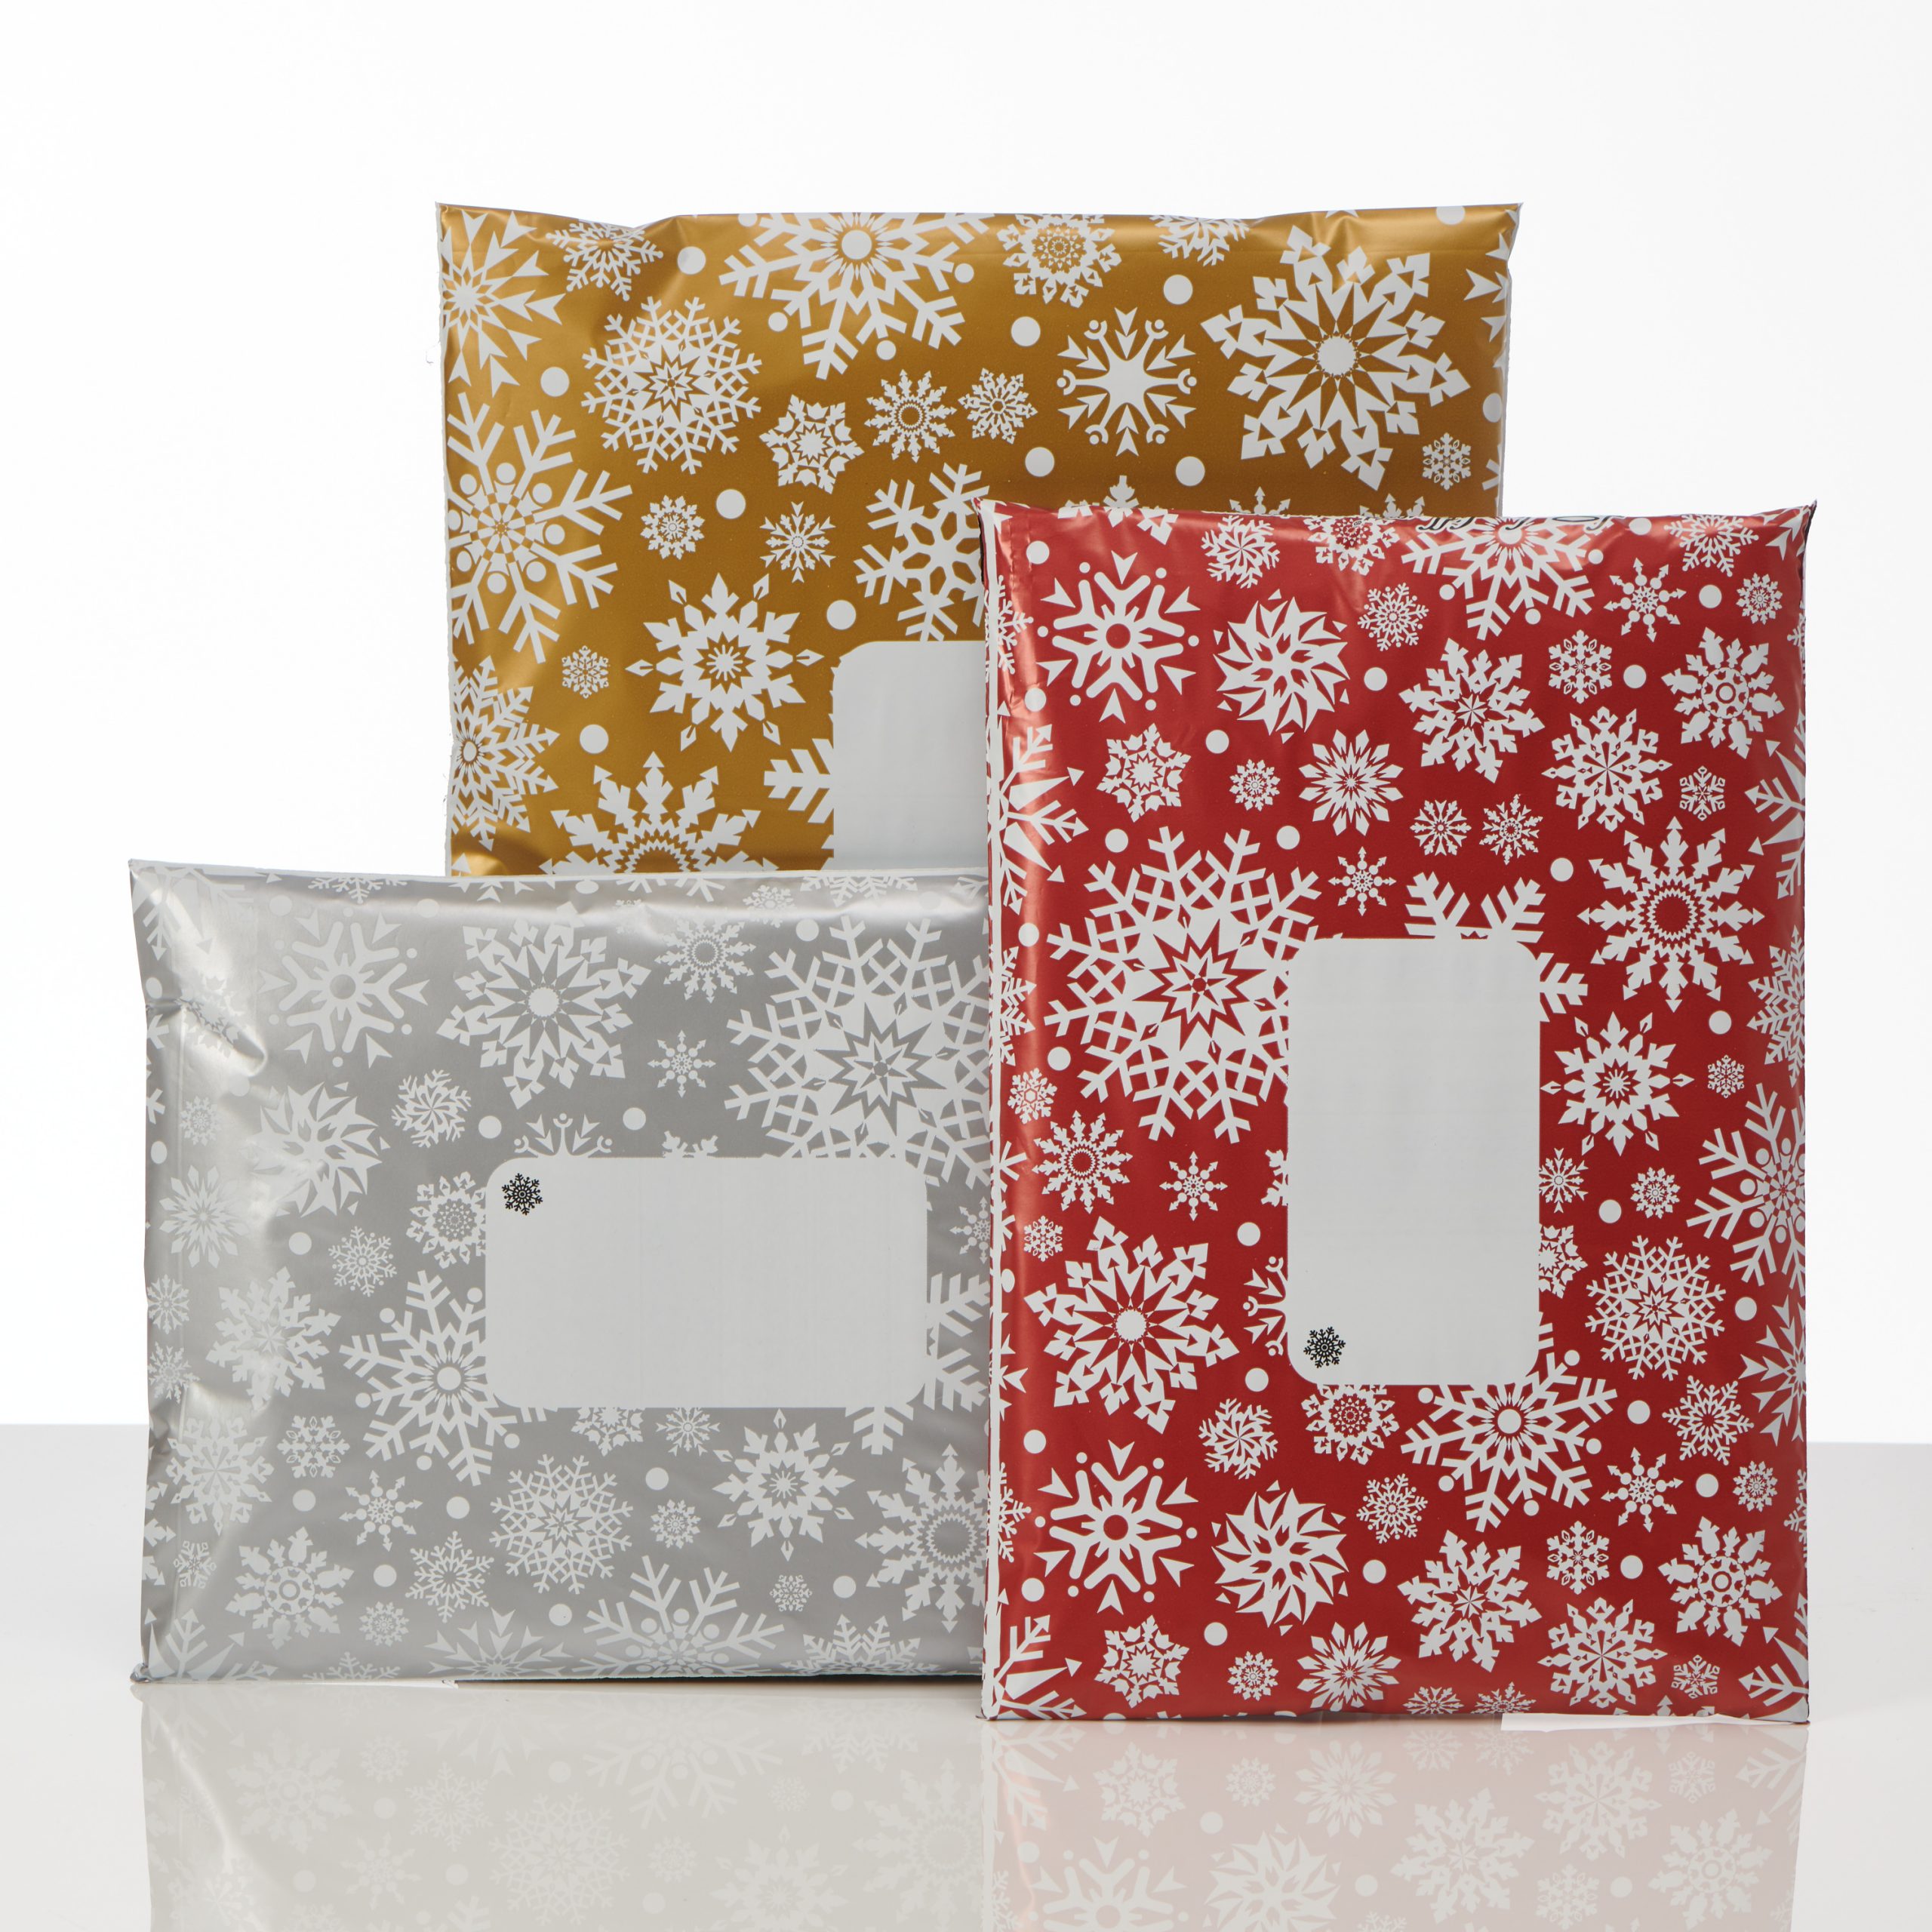 Divinely different snowflake mailing bags group